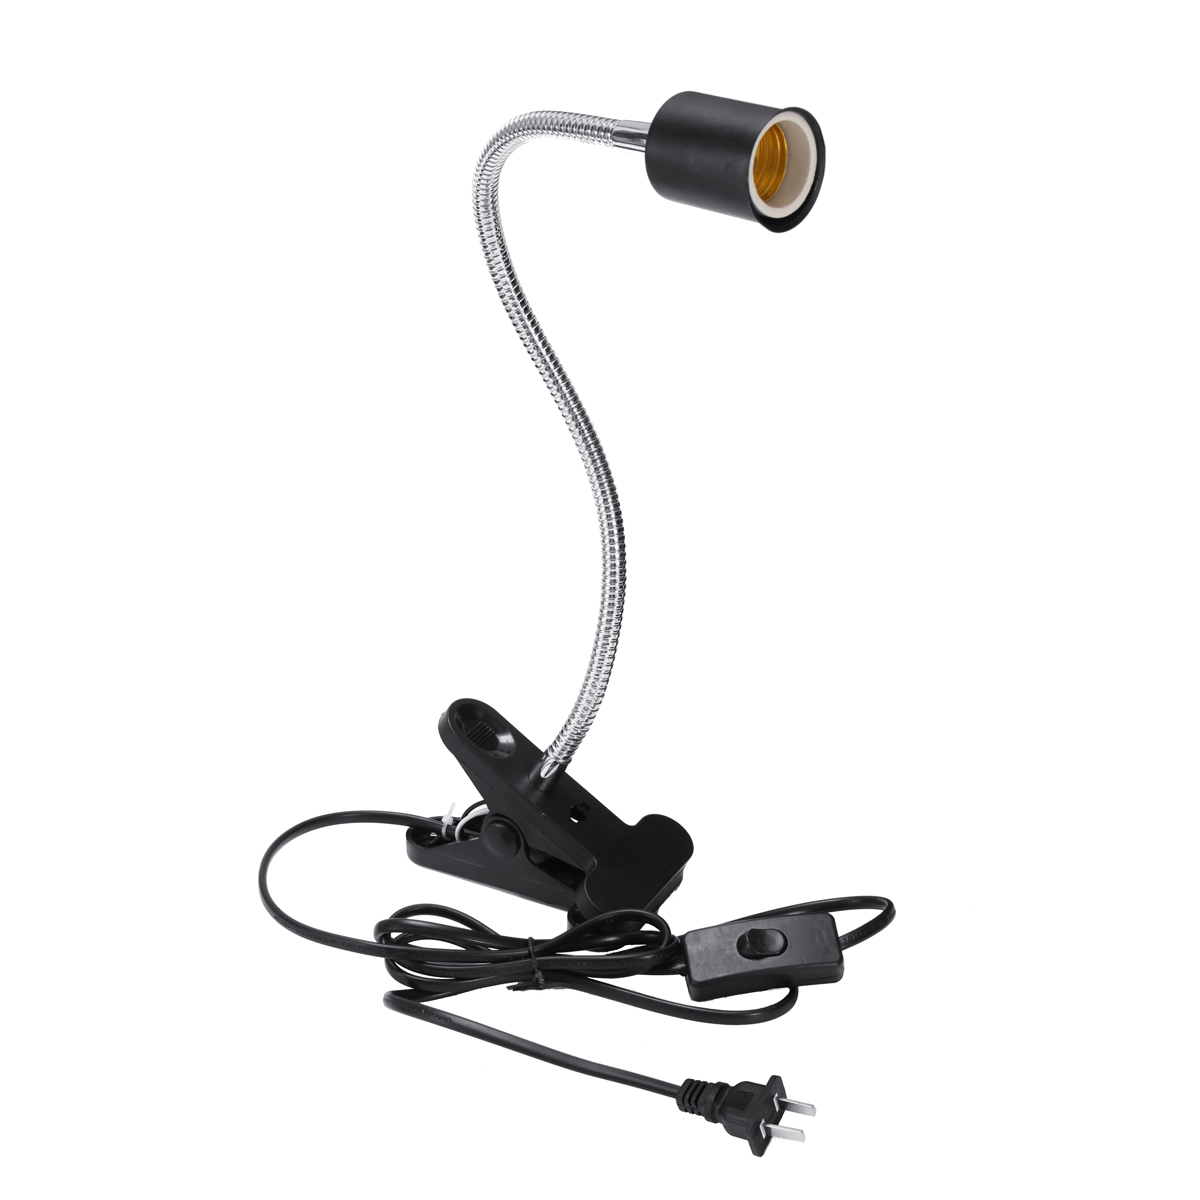 40CM-E27-Flexible-Pet-Reptile-Light-Bulb-Adapter-Lamp-Holder-Socket-with-Clip-ON-OFF-Switch-1309498-2